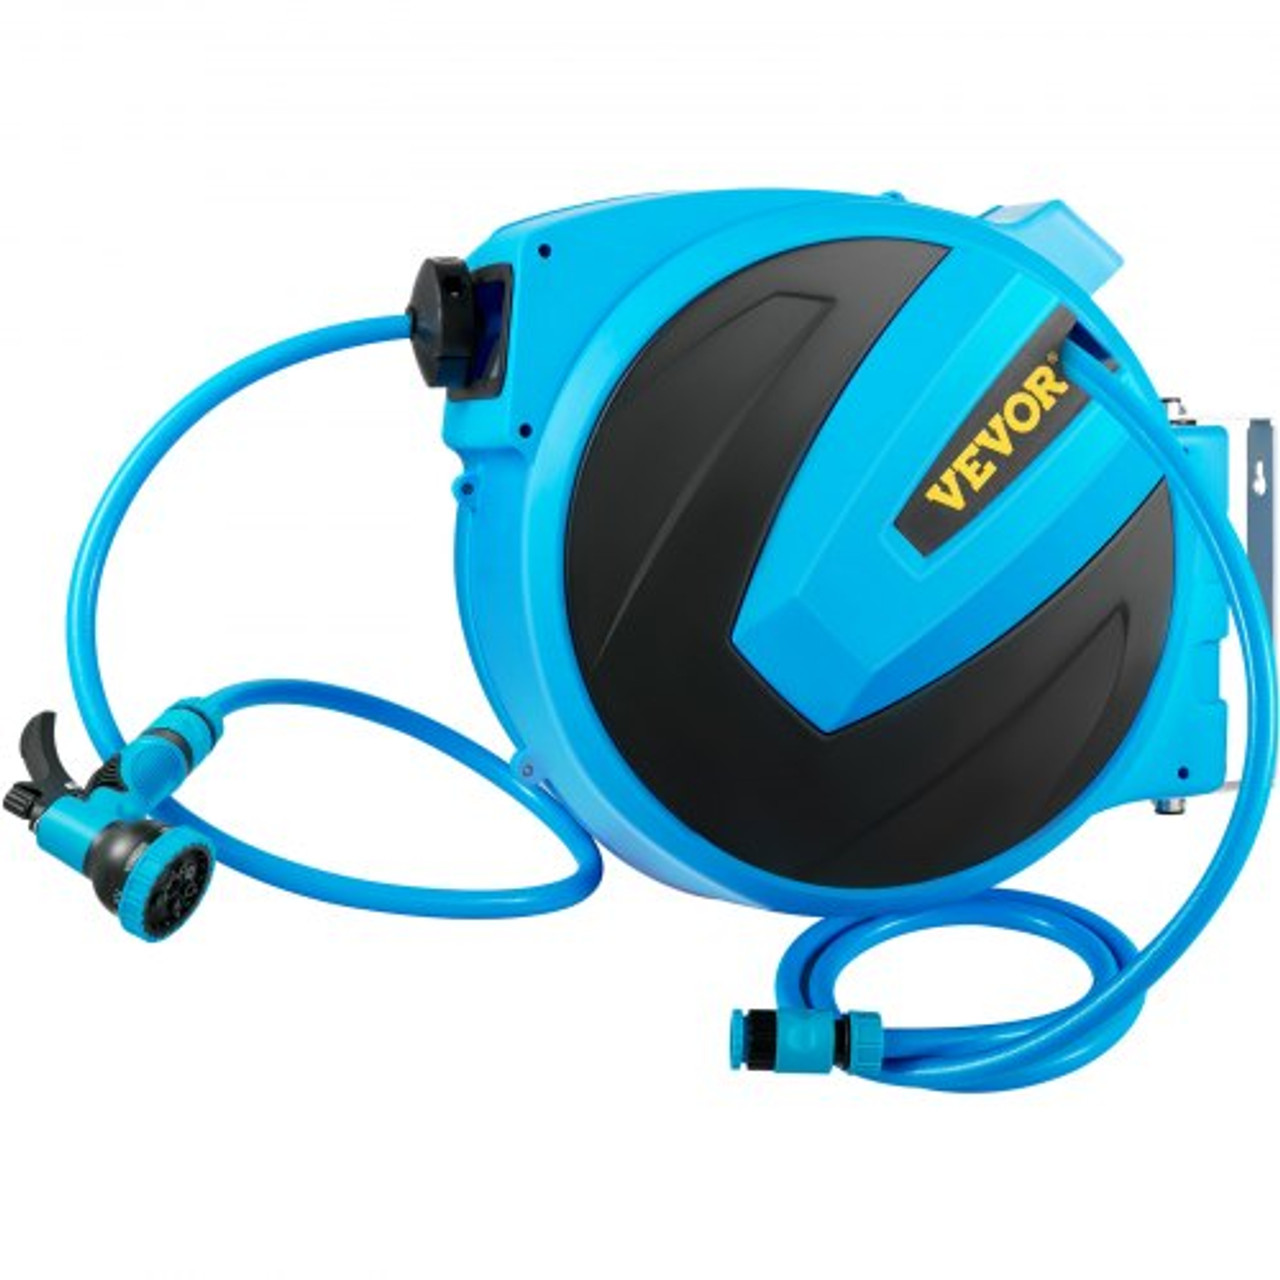 Retractable Hose Reel, 1/2 inch x 85 ft, Any Length Lock & Automatic Rewind Water Hose, Wall Mounted Garden Hose Reel w/ 180ø Swivel Bracket and 7 Pattern Hose Nozzle, Blue